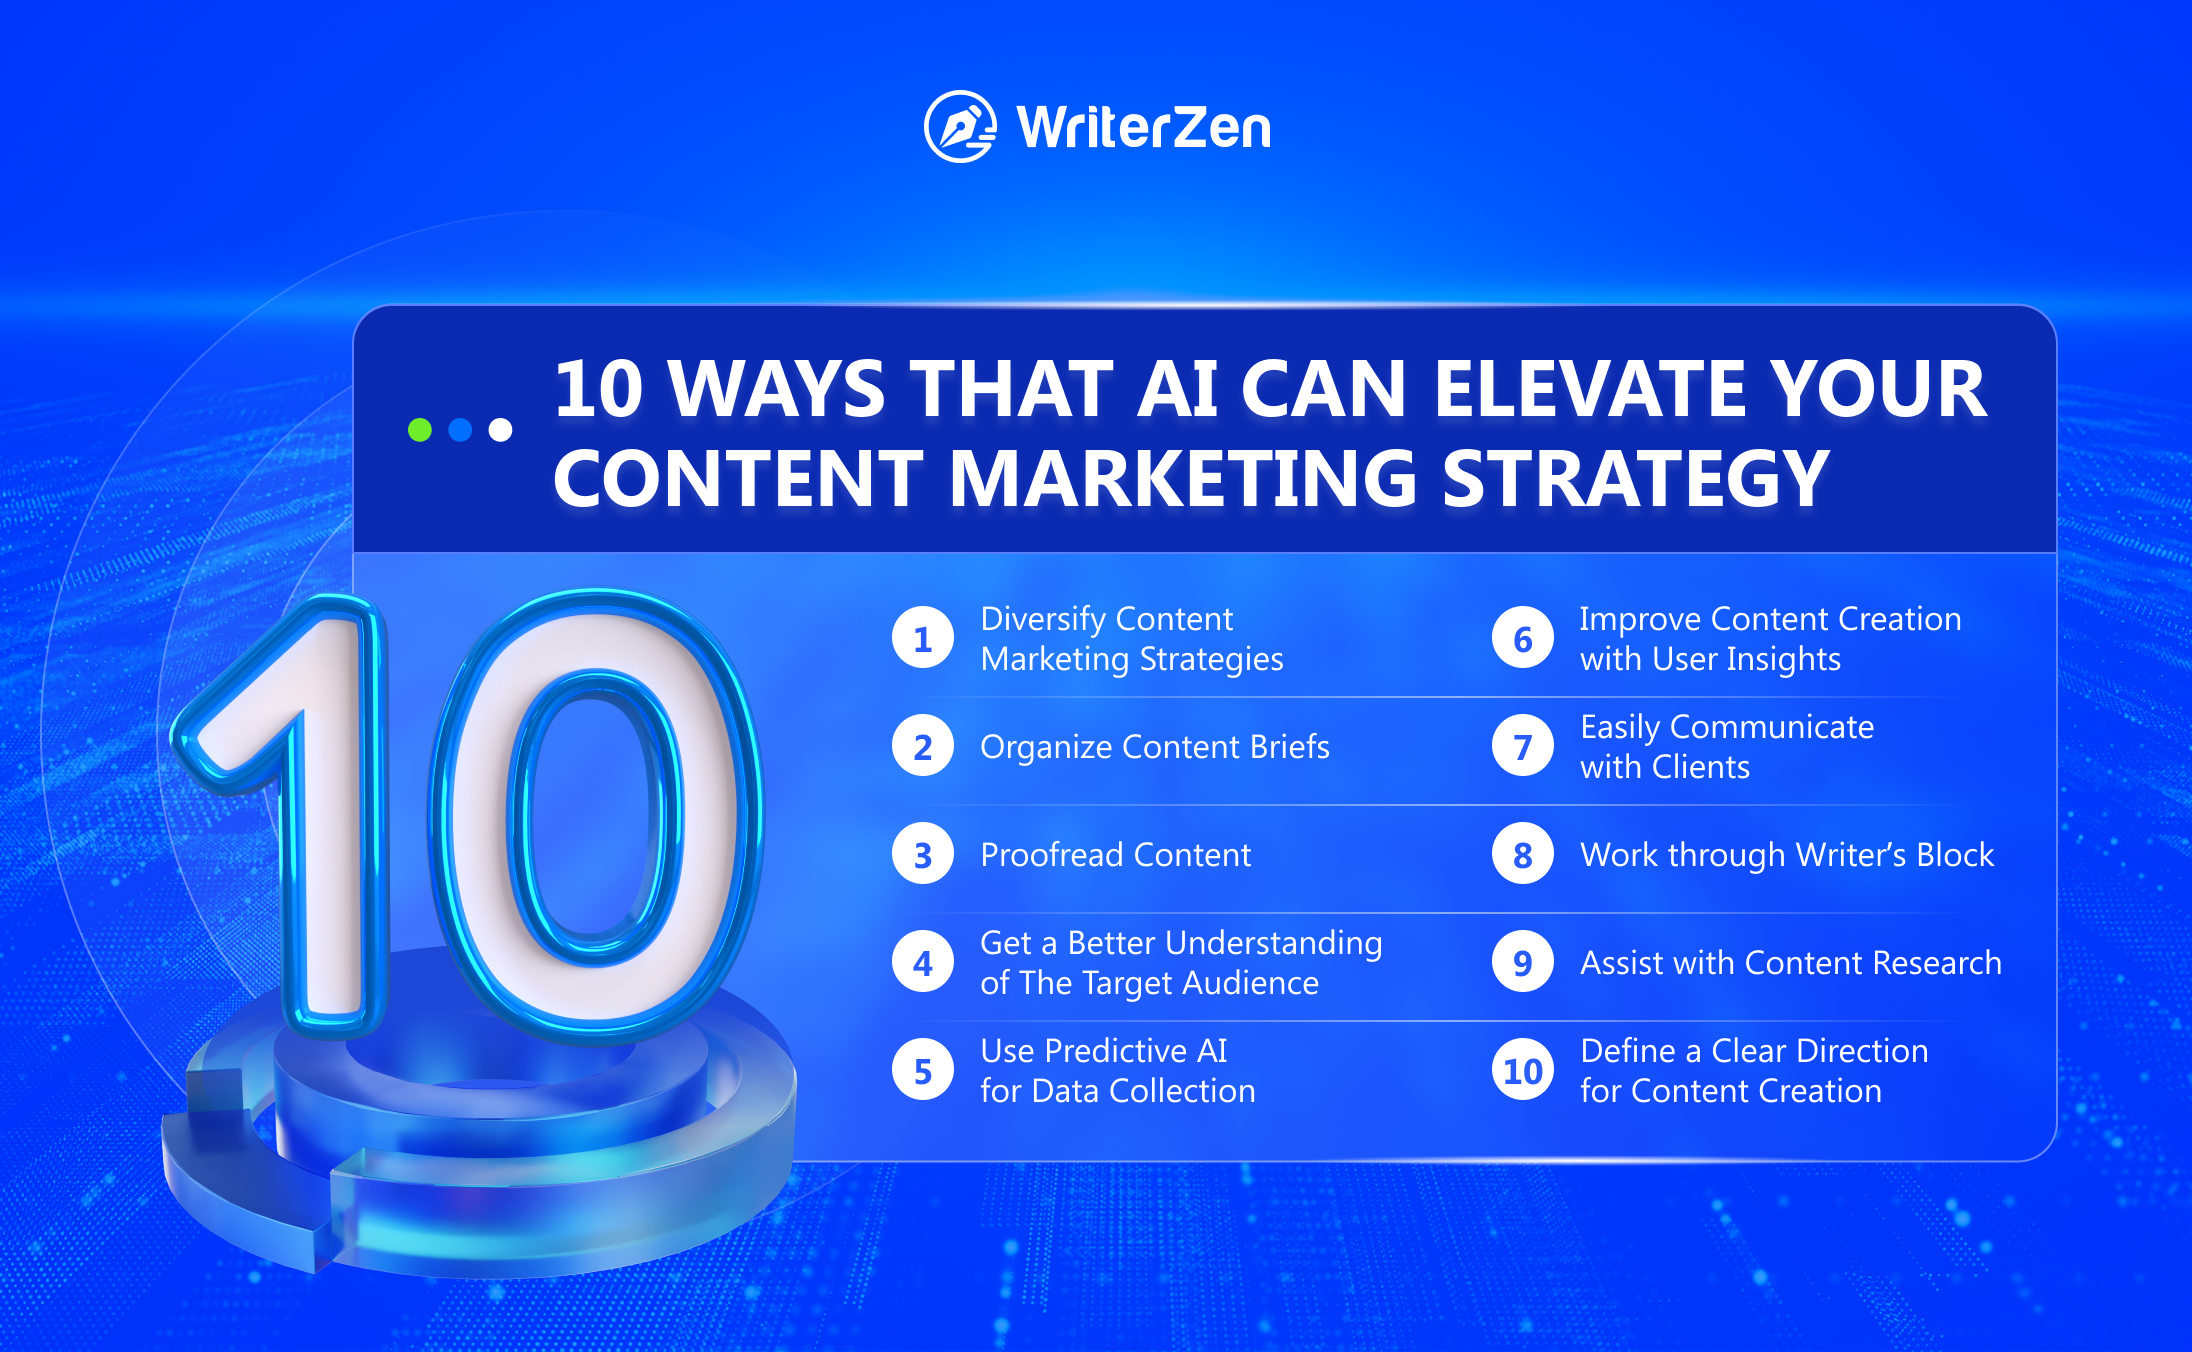 Ten Ways that AI Can Elevate Your Content Marketing Strategy